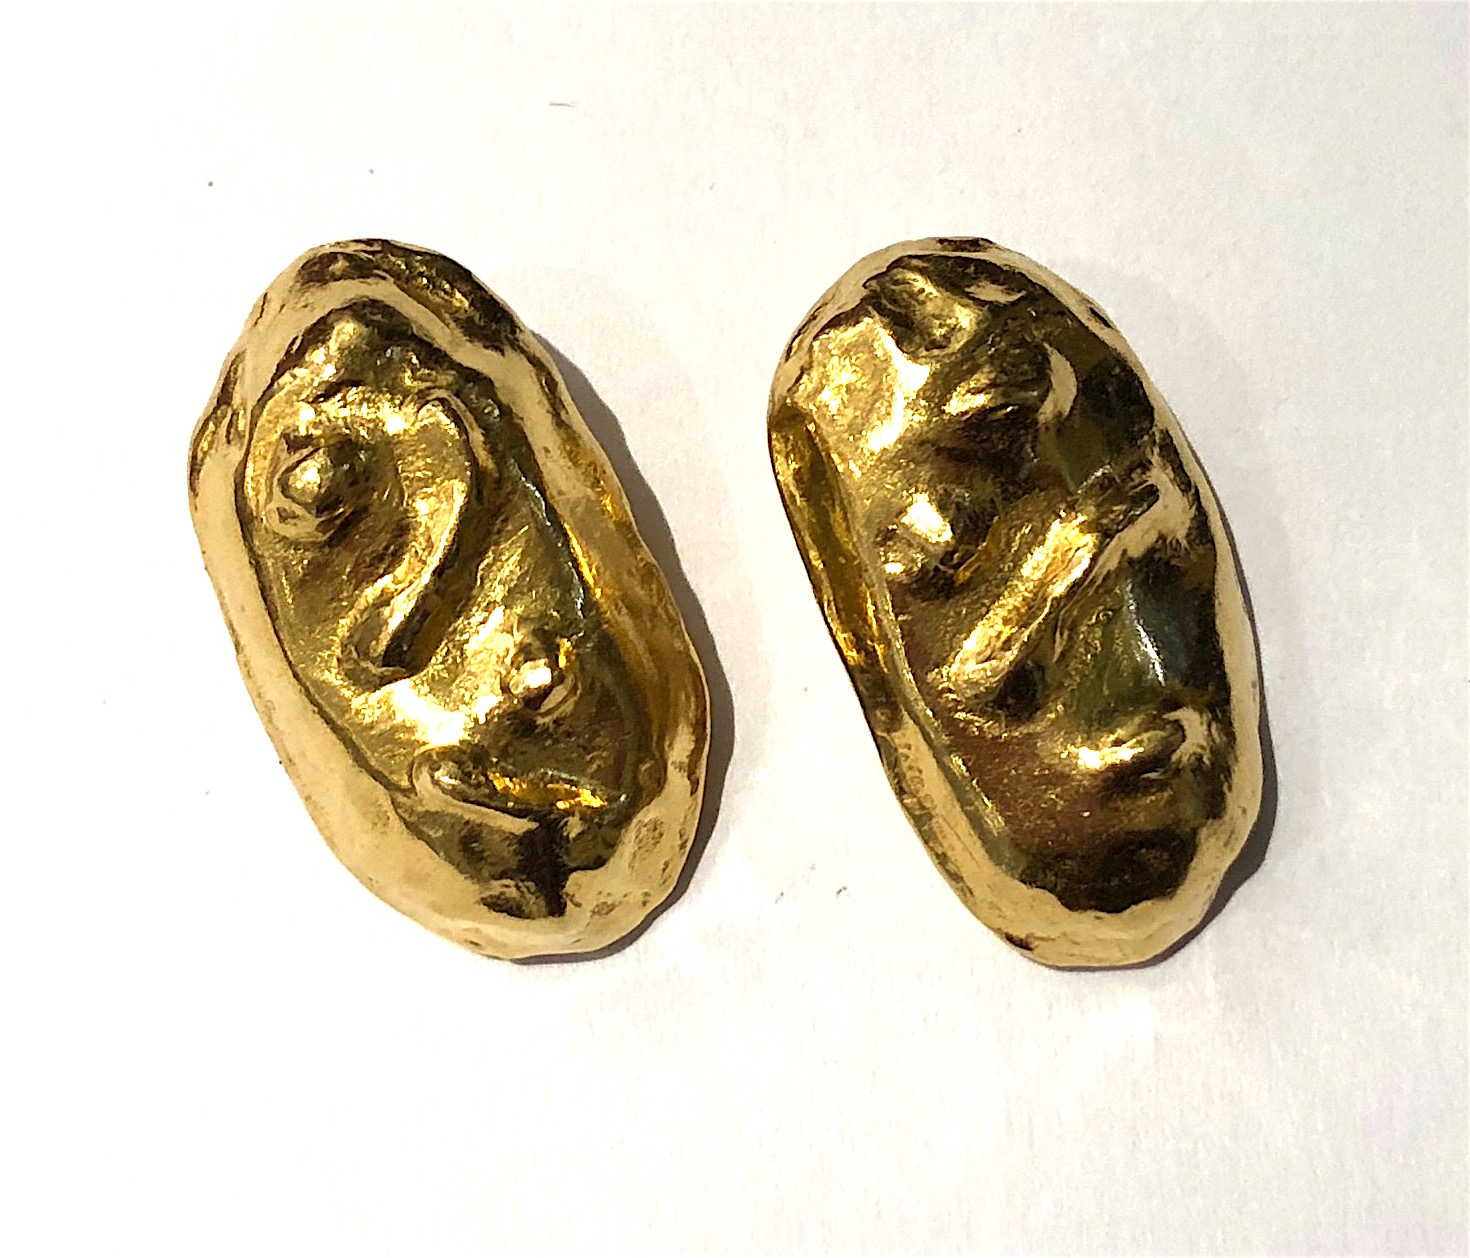 Jean Mahie “Abstract Nugget” earrings, 22K gold, signed: Jean Mahie (script signature, 2x) 22K (2x), c. 1980’s